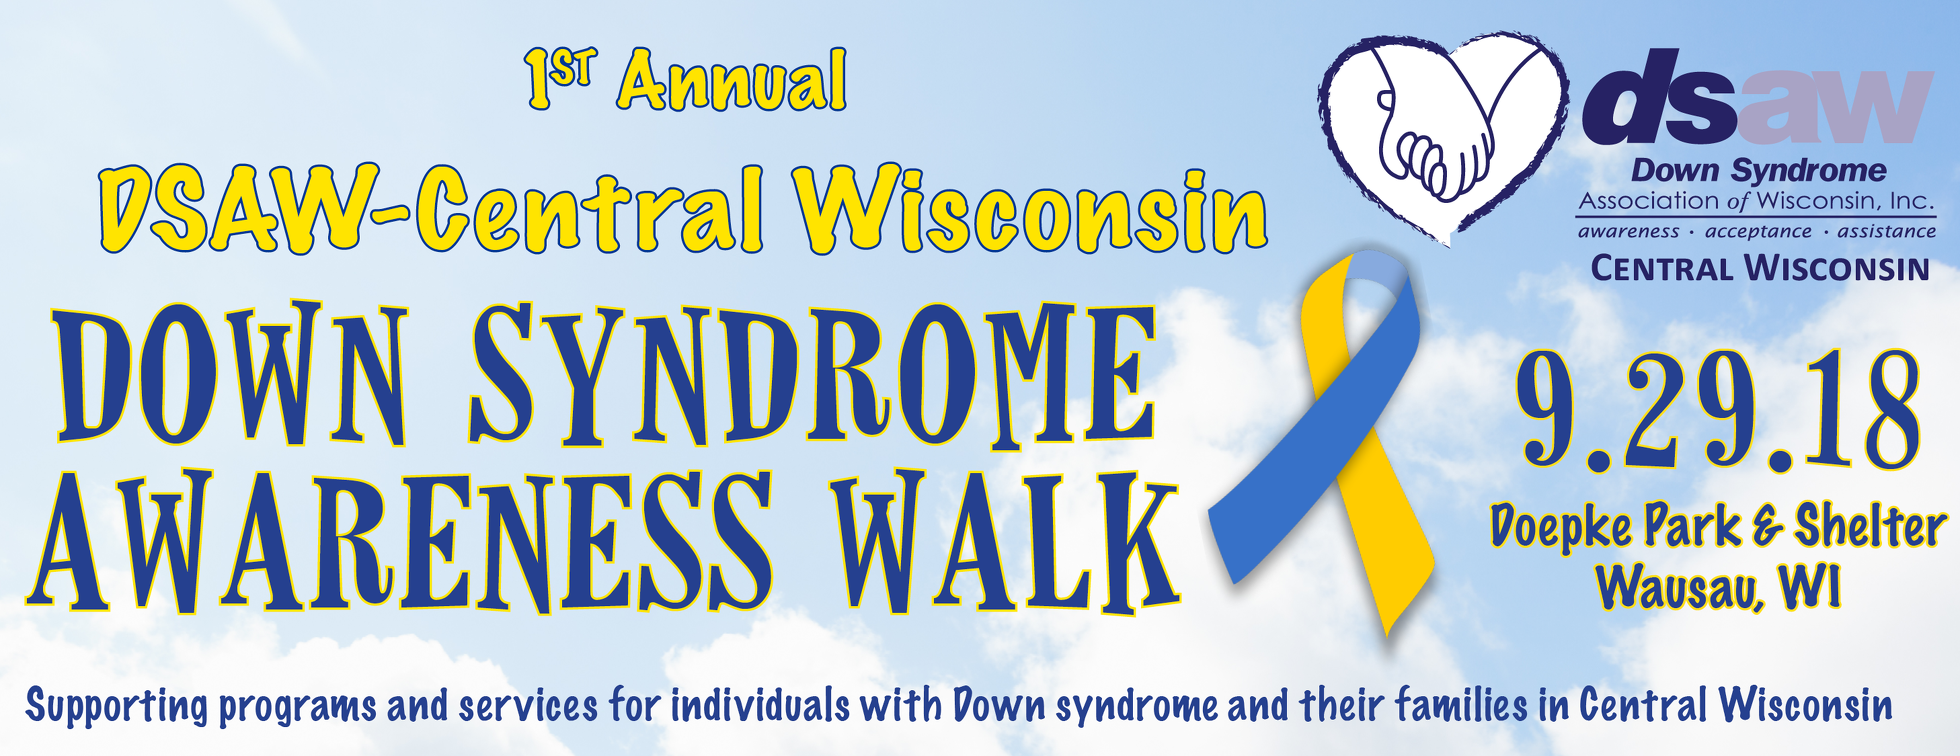 Central Wisconsin Down Syndrome Awareness Walk